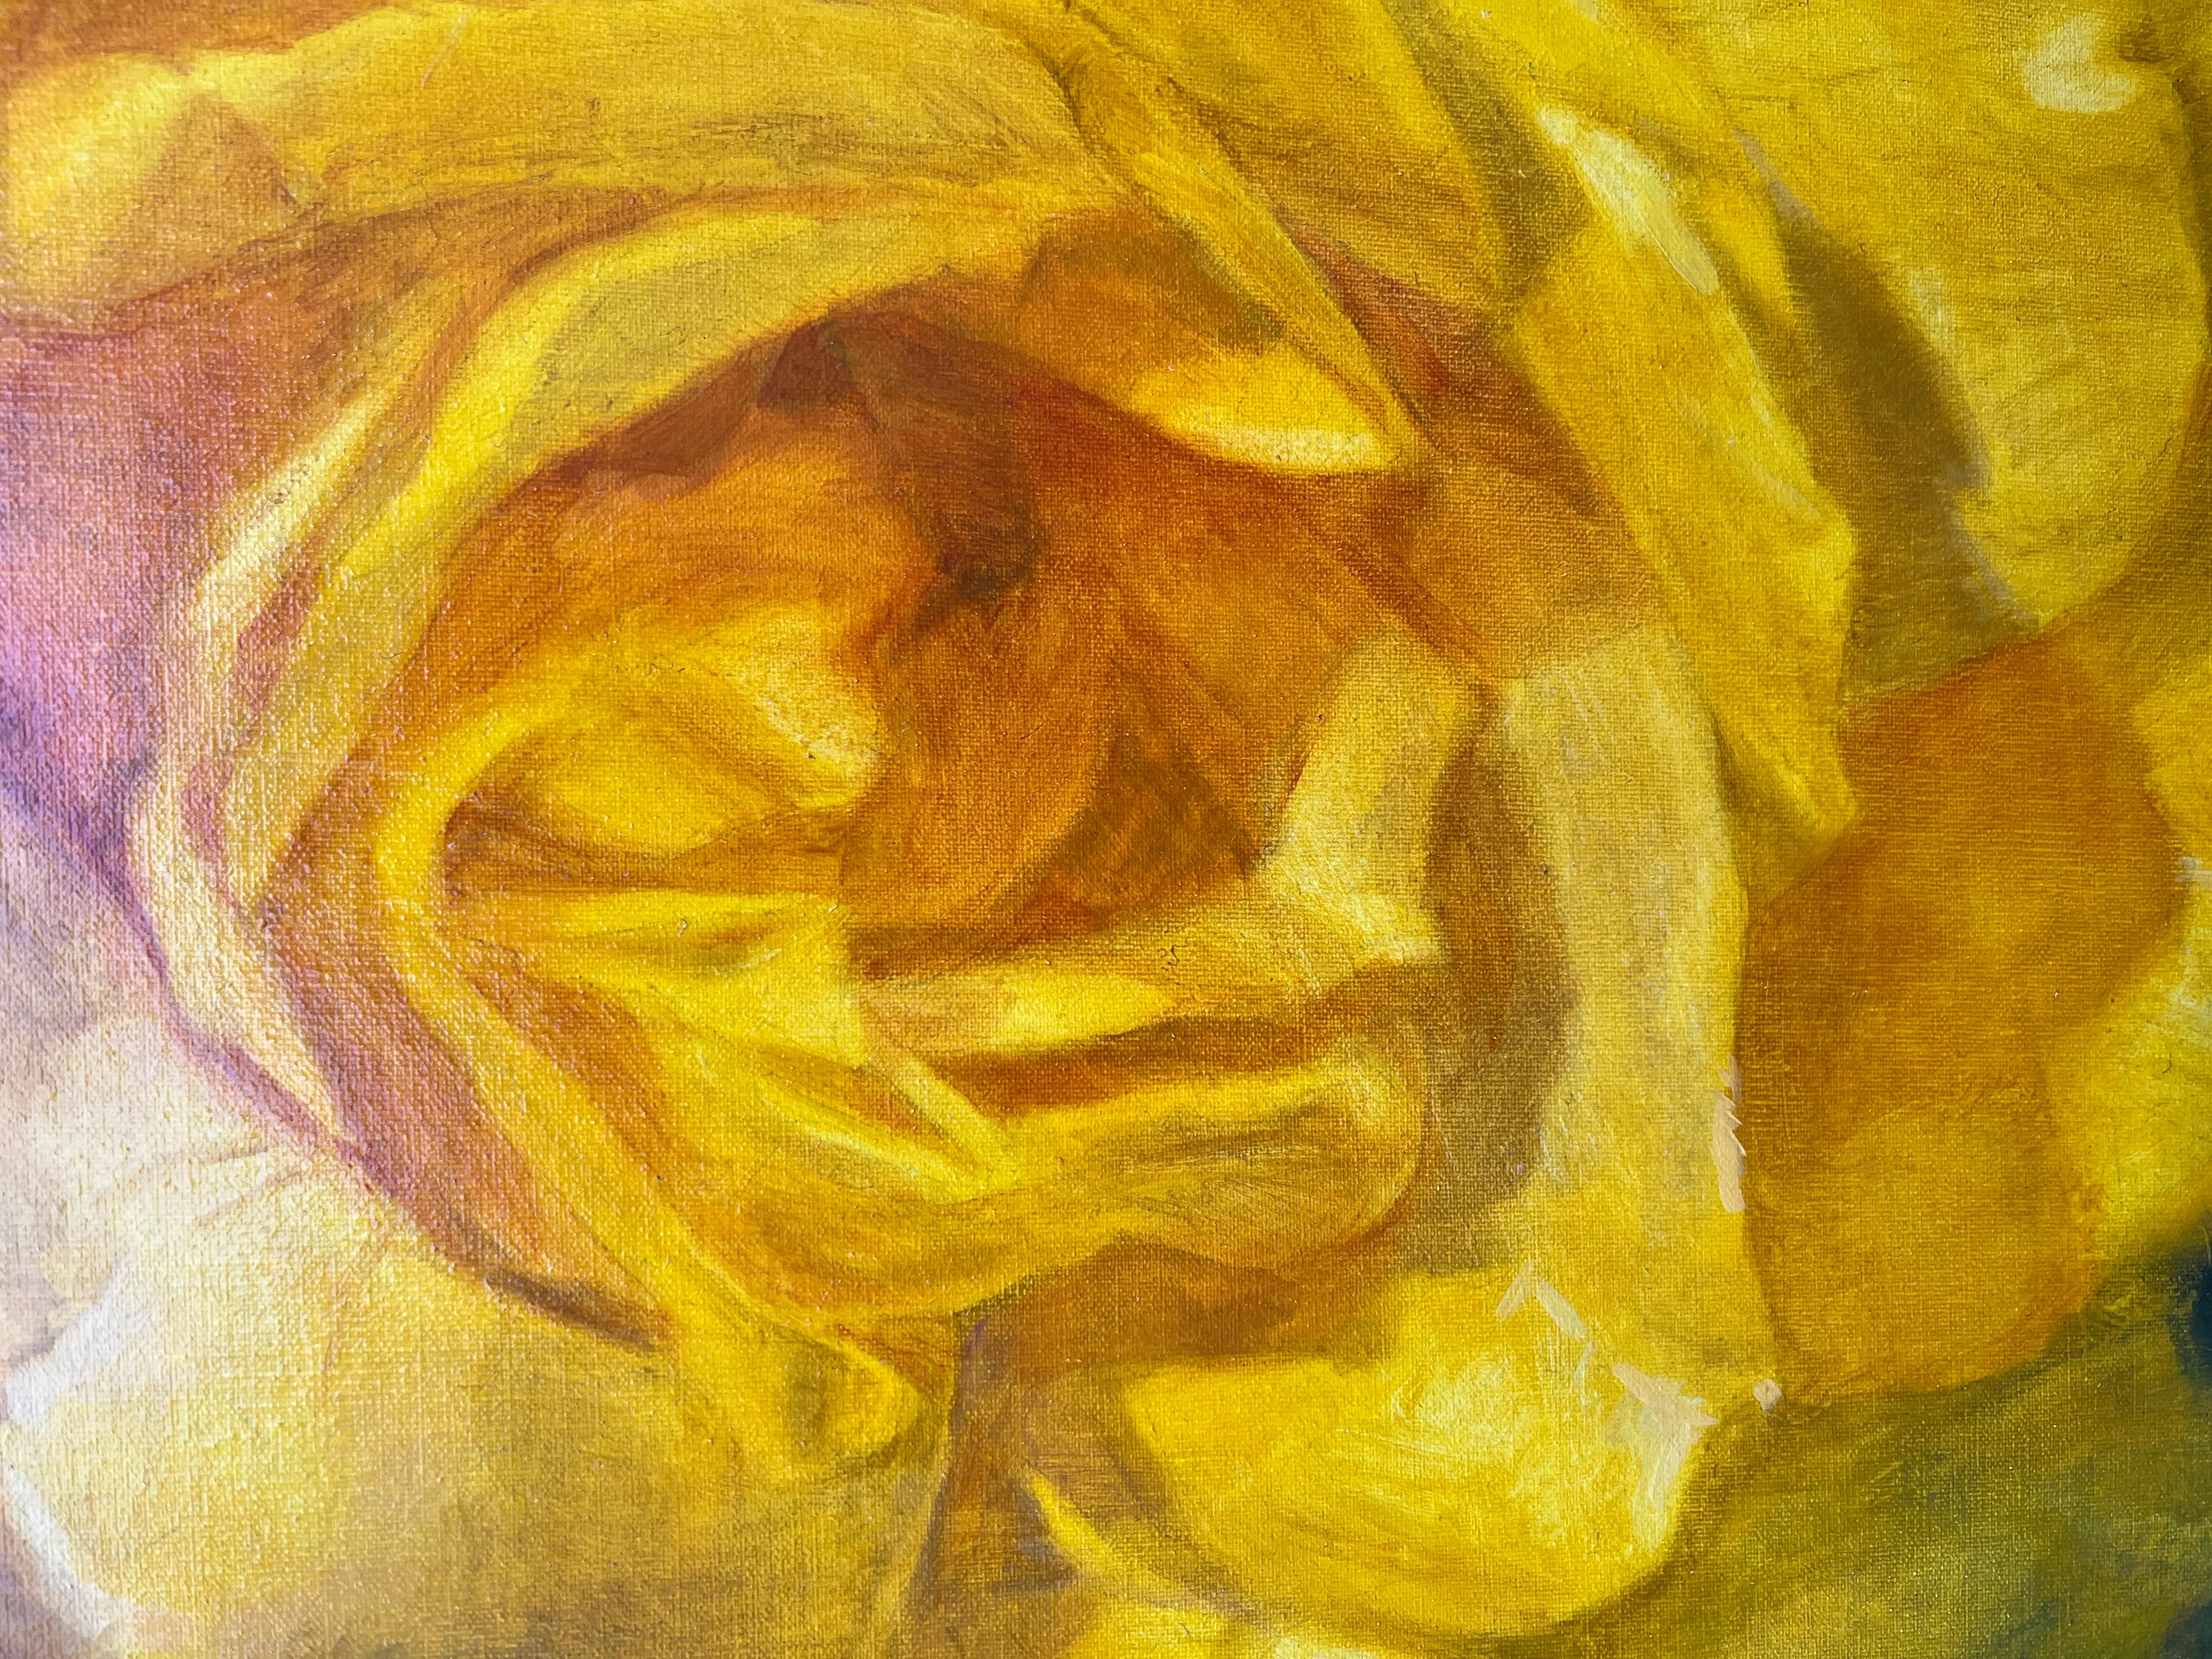 <p>Artist Comments<br>A yellow rose blooms atop a bush, its petals shining brilliantly under the sun. Through light and color, Hilary captures the inspiring beauty of her garden. For her, painting flowers serves as a metaphor for life and